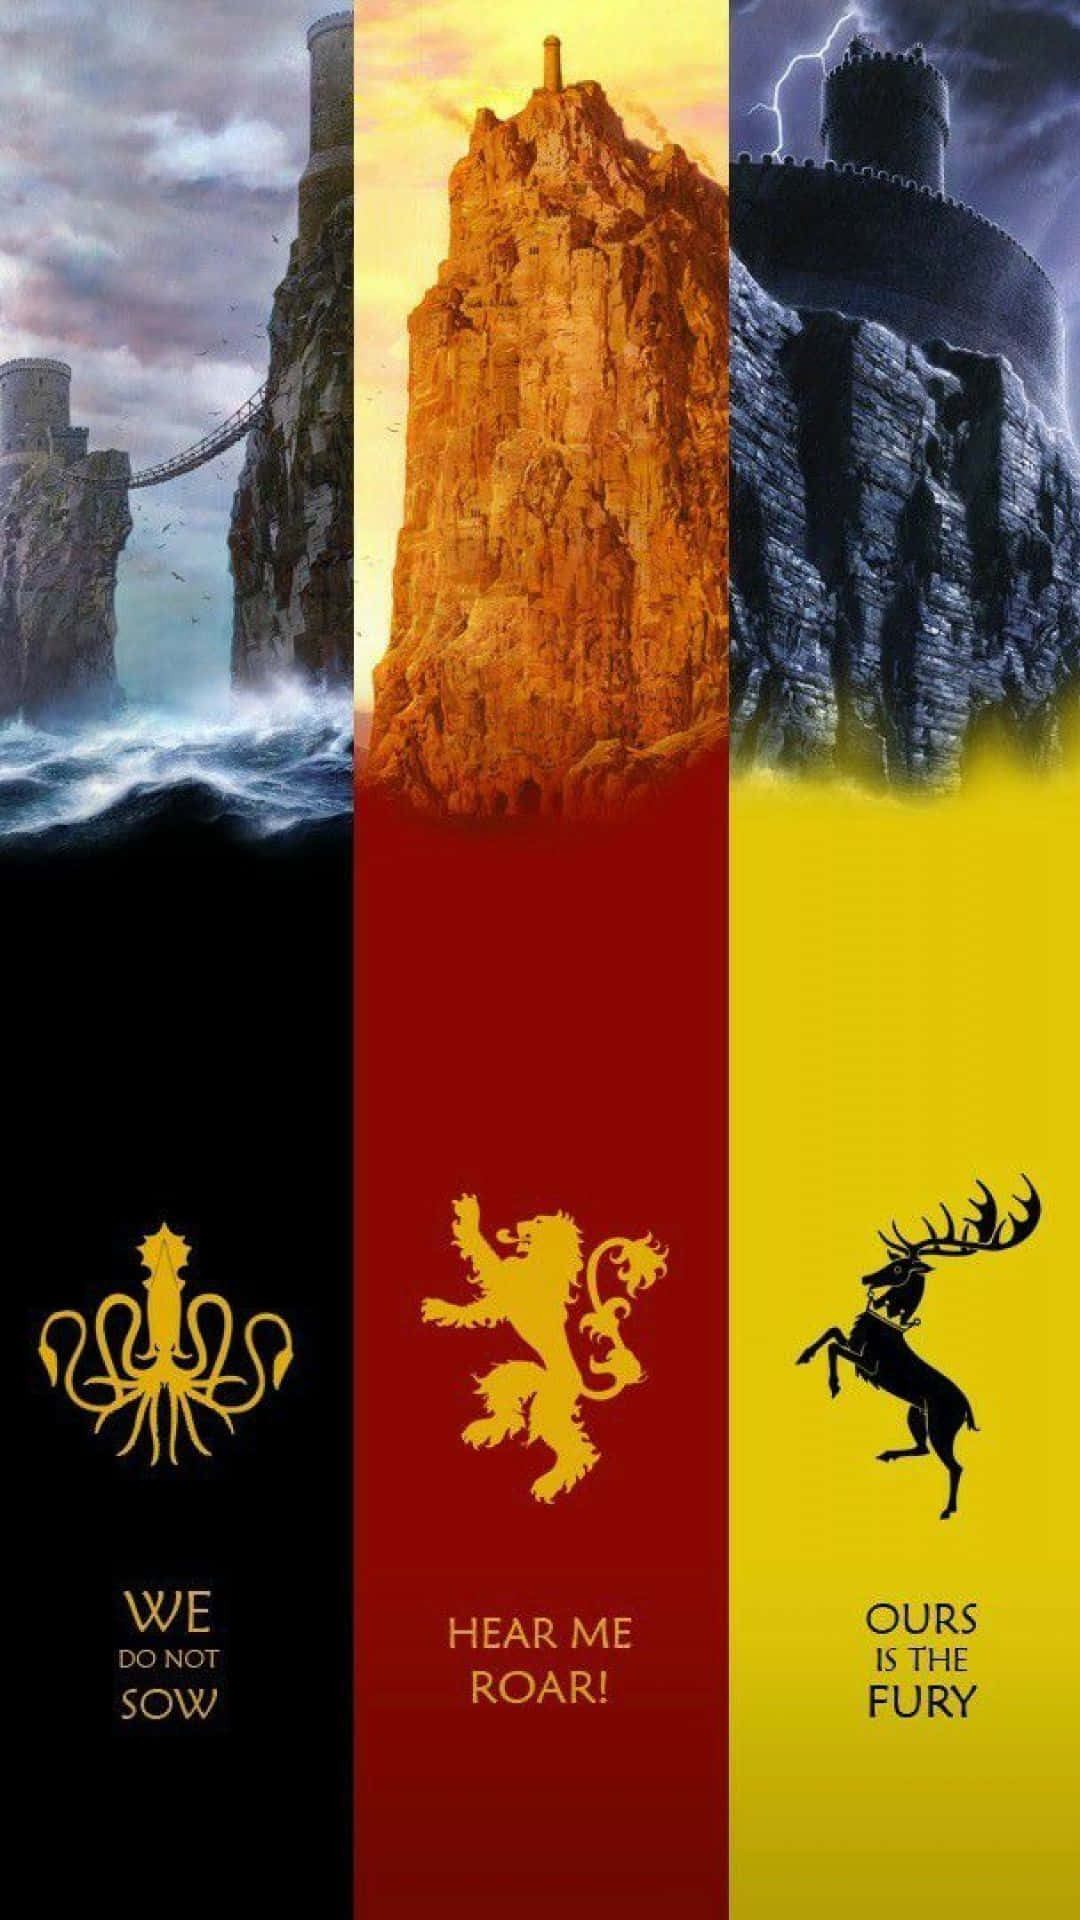 Be Part of the Epic Journey - Get the Official Game Of Thrones Iphone Wallpaper